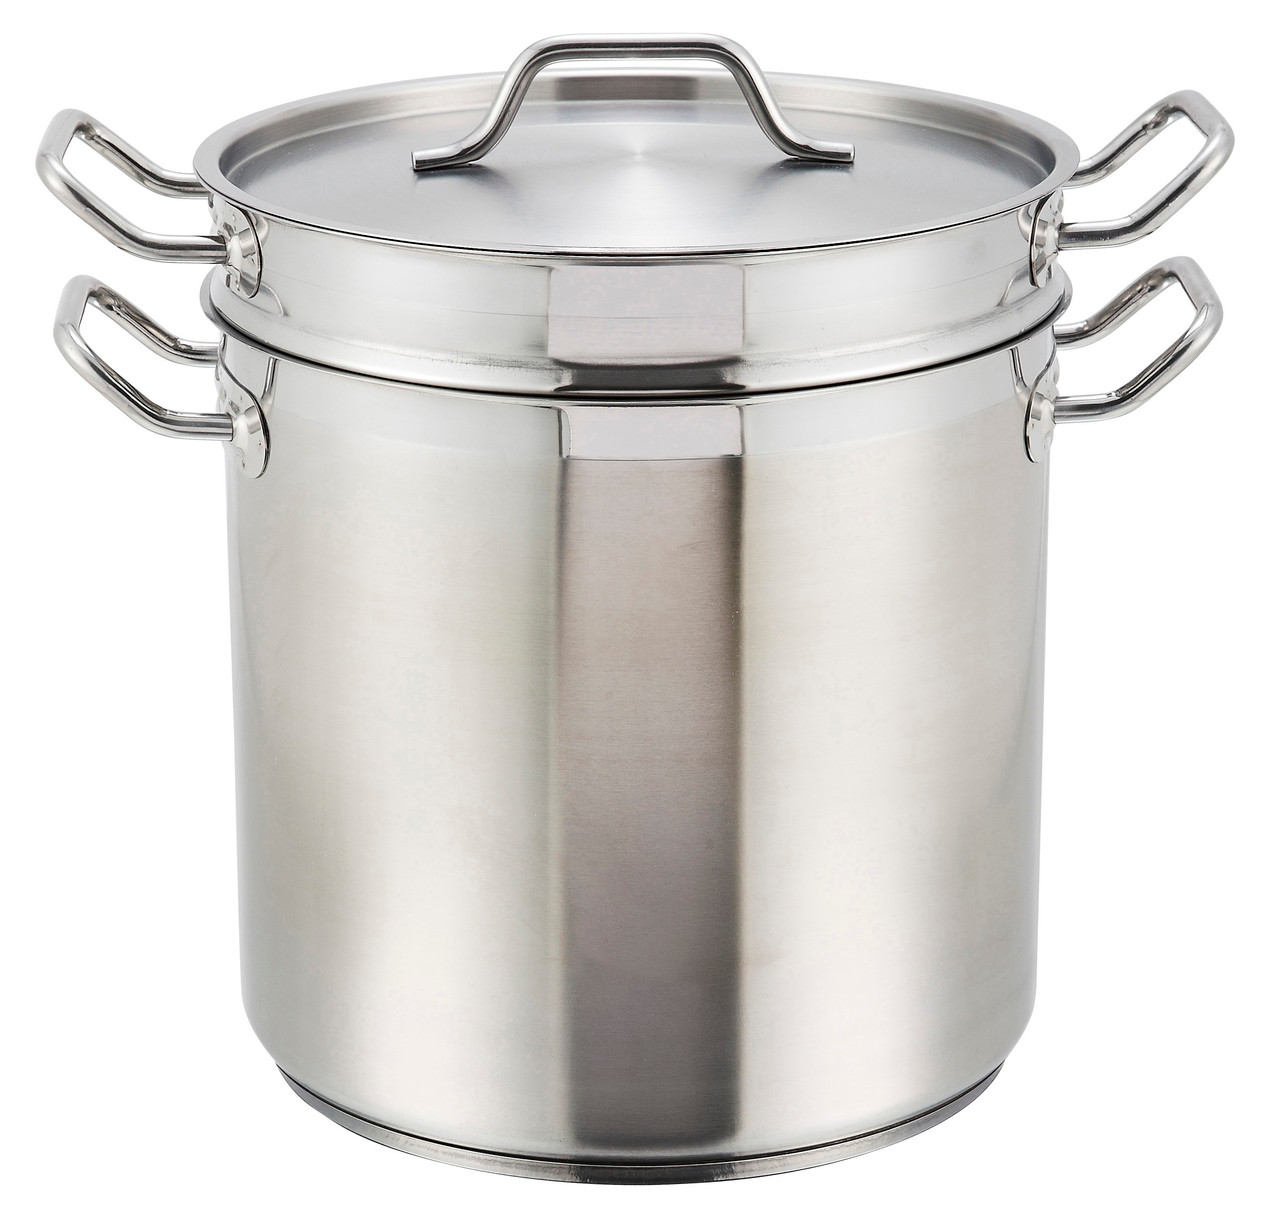 Winco 8qt S/S Double Boiler w/Cover, Induction-Ready